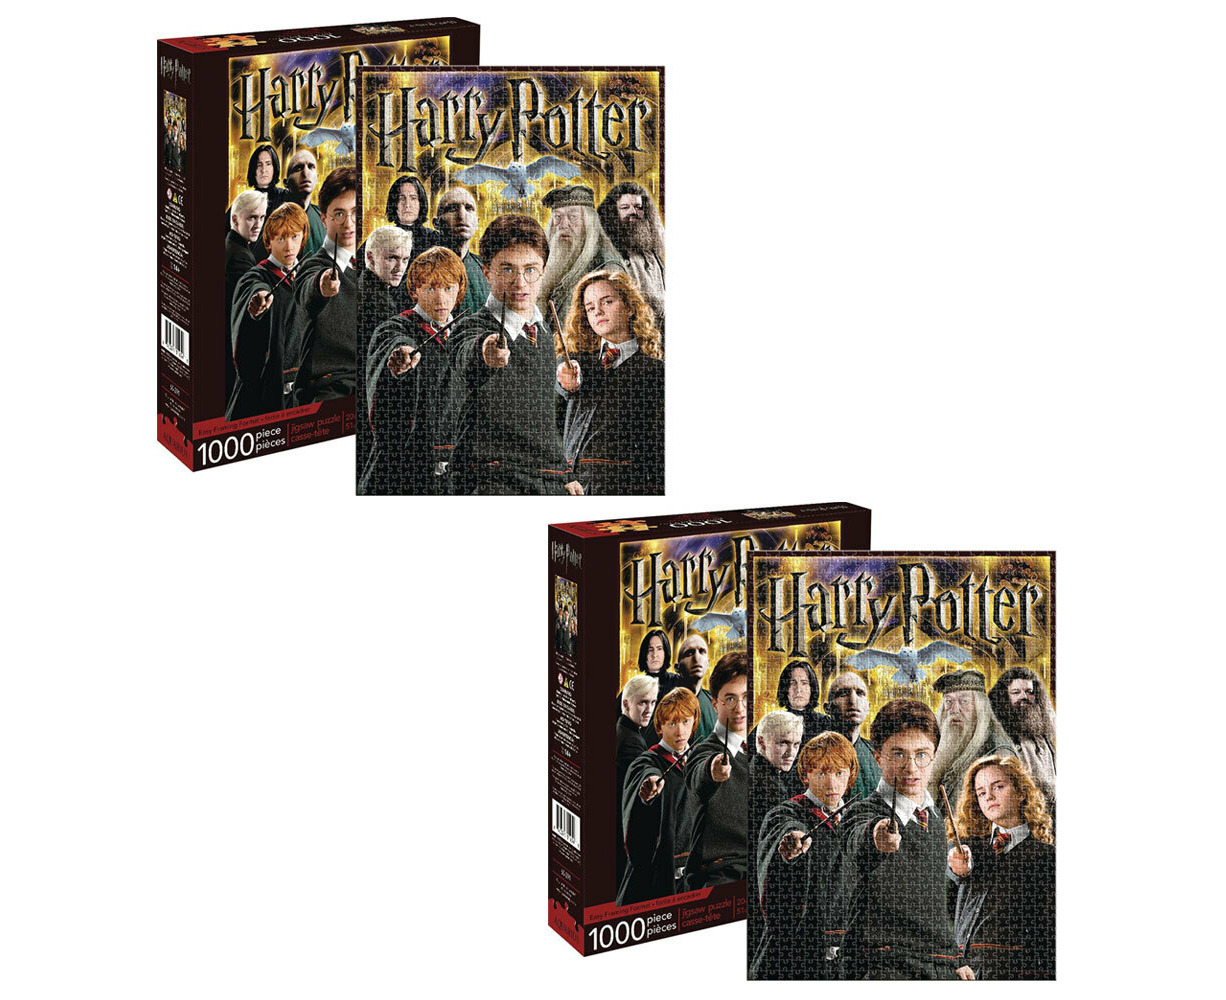 Harry Potter Movie Collage 1000 Piece Jigsaw Puzzle WIZARDING